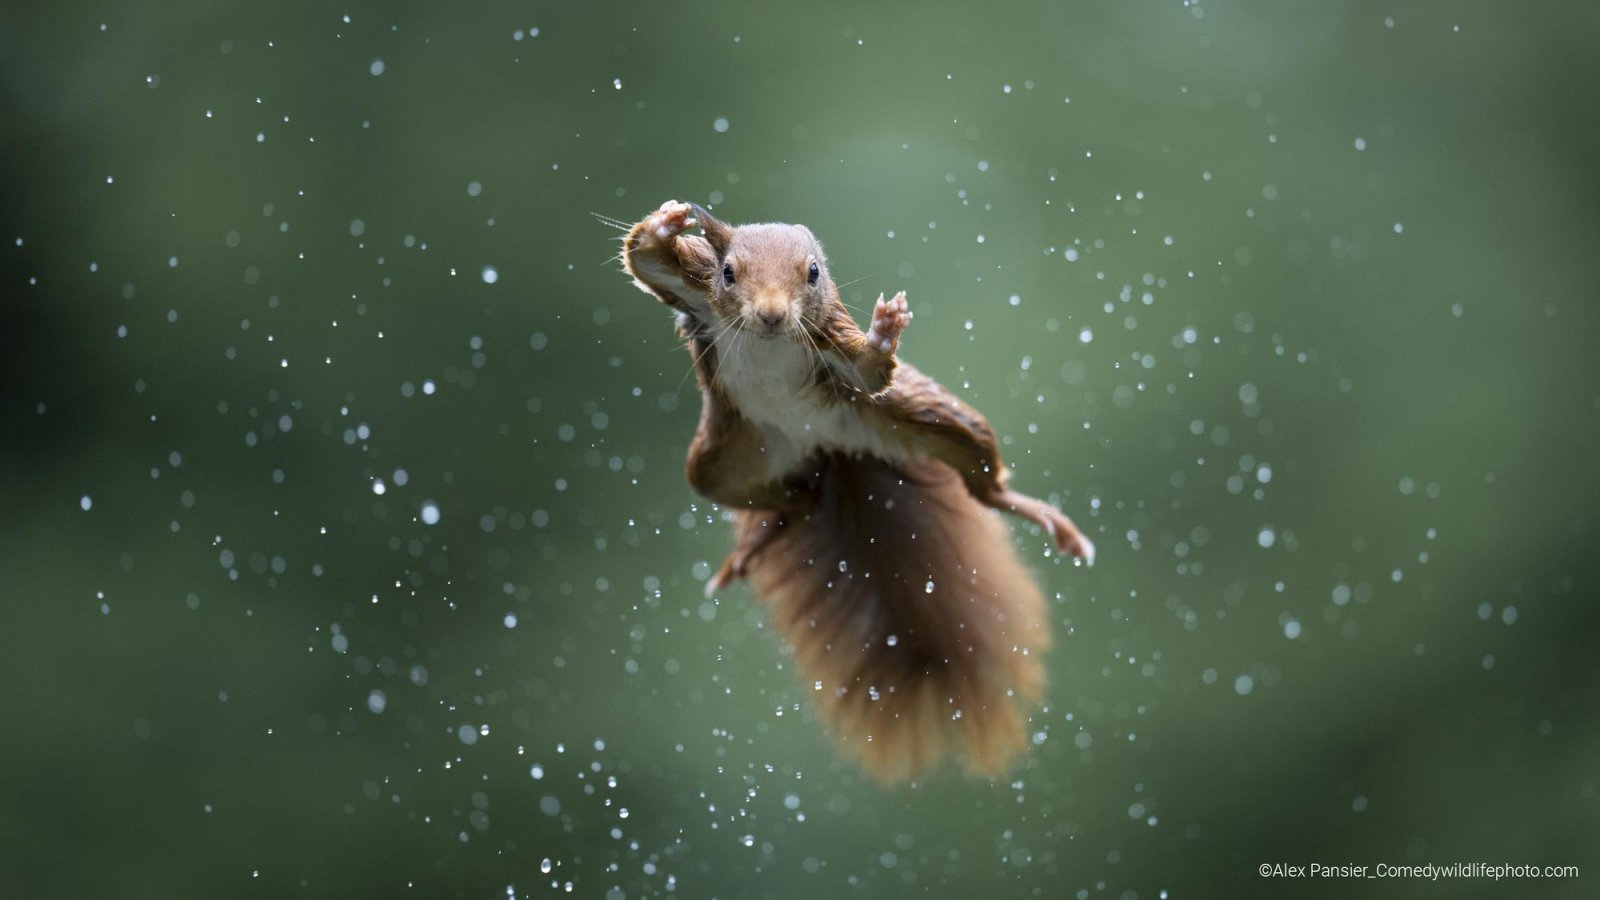 A red squirrel is pictured mid-air during a rain storm.